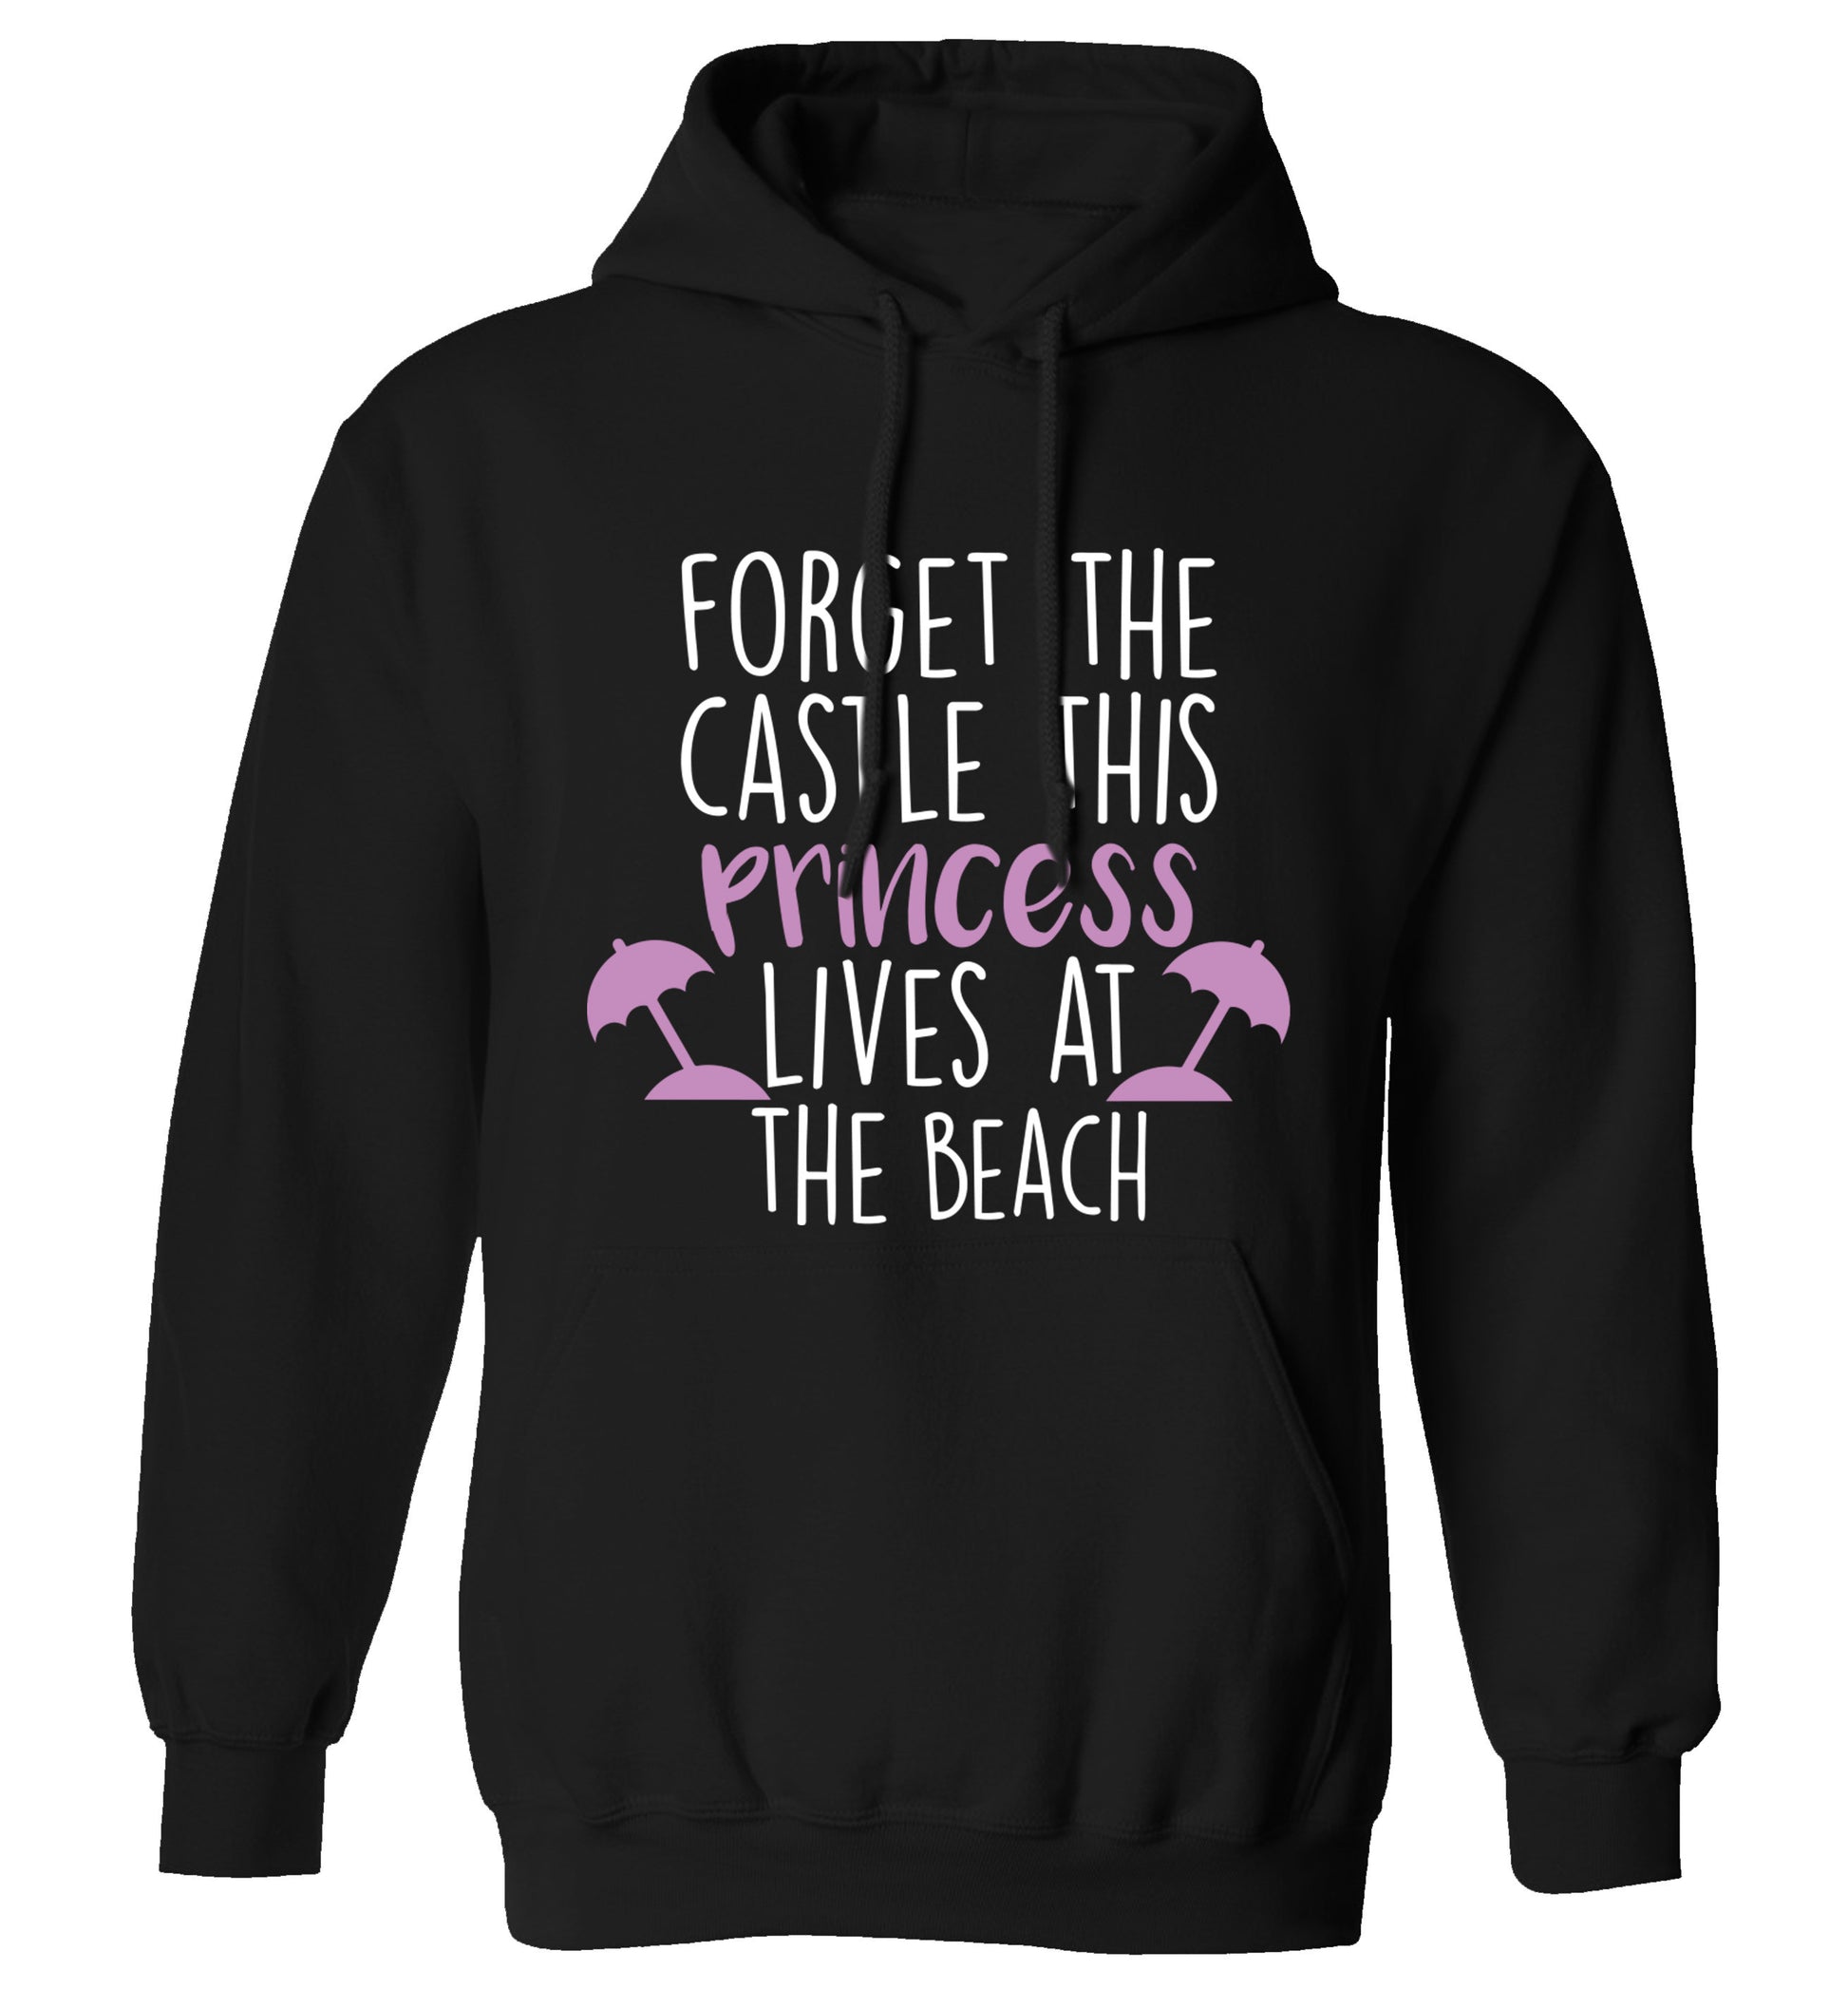 Forget the castle this princess lives at the beach adults unisex black hoodie 2XL